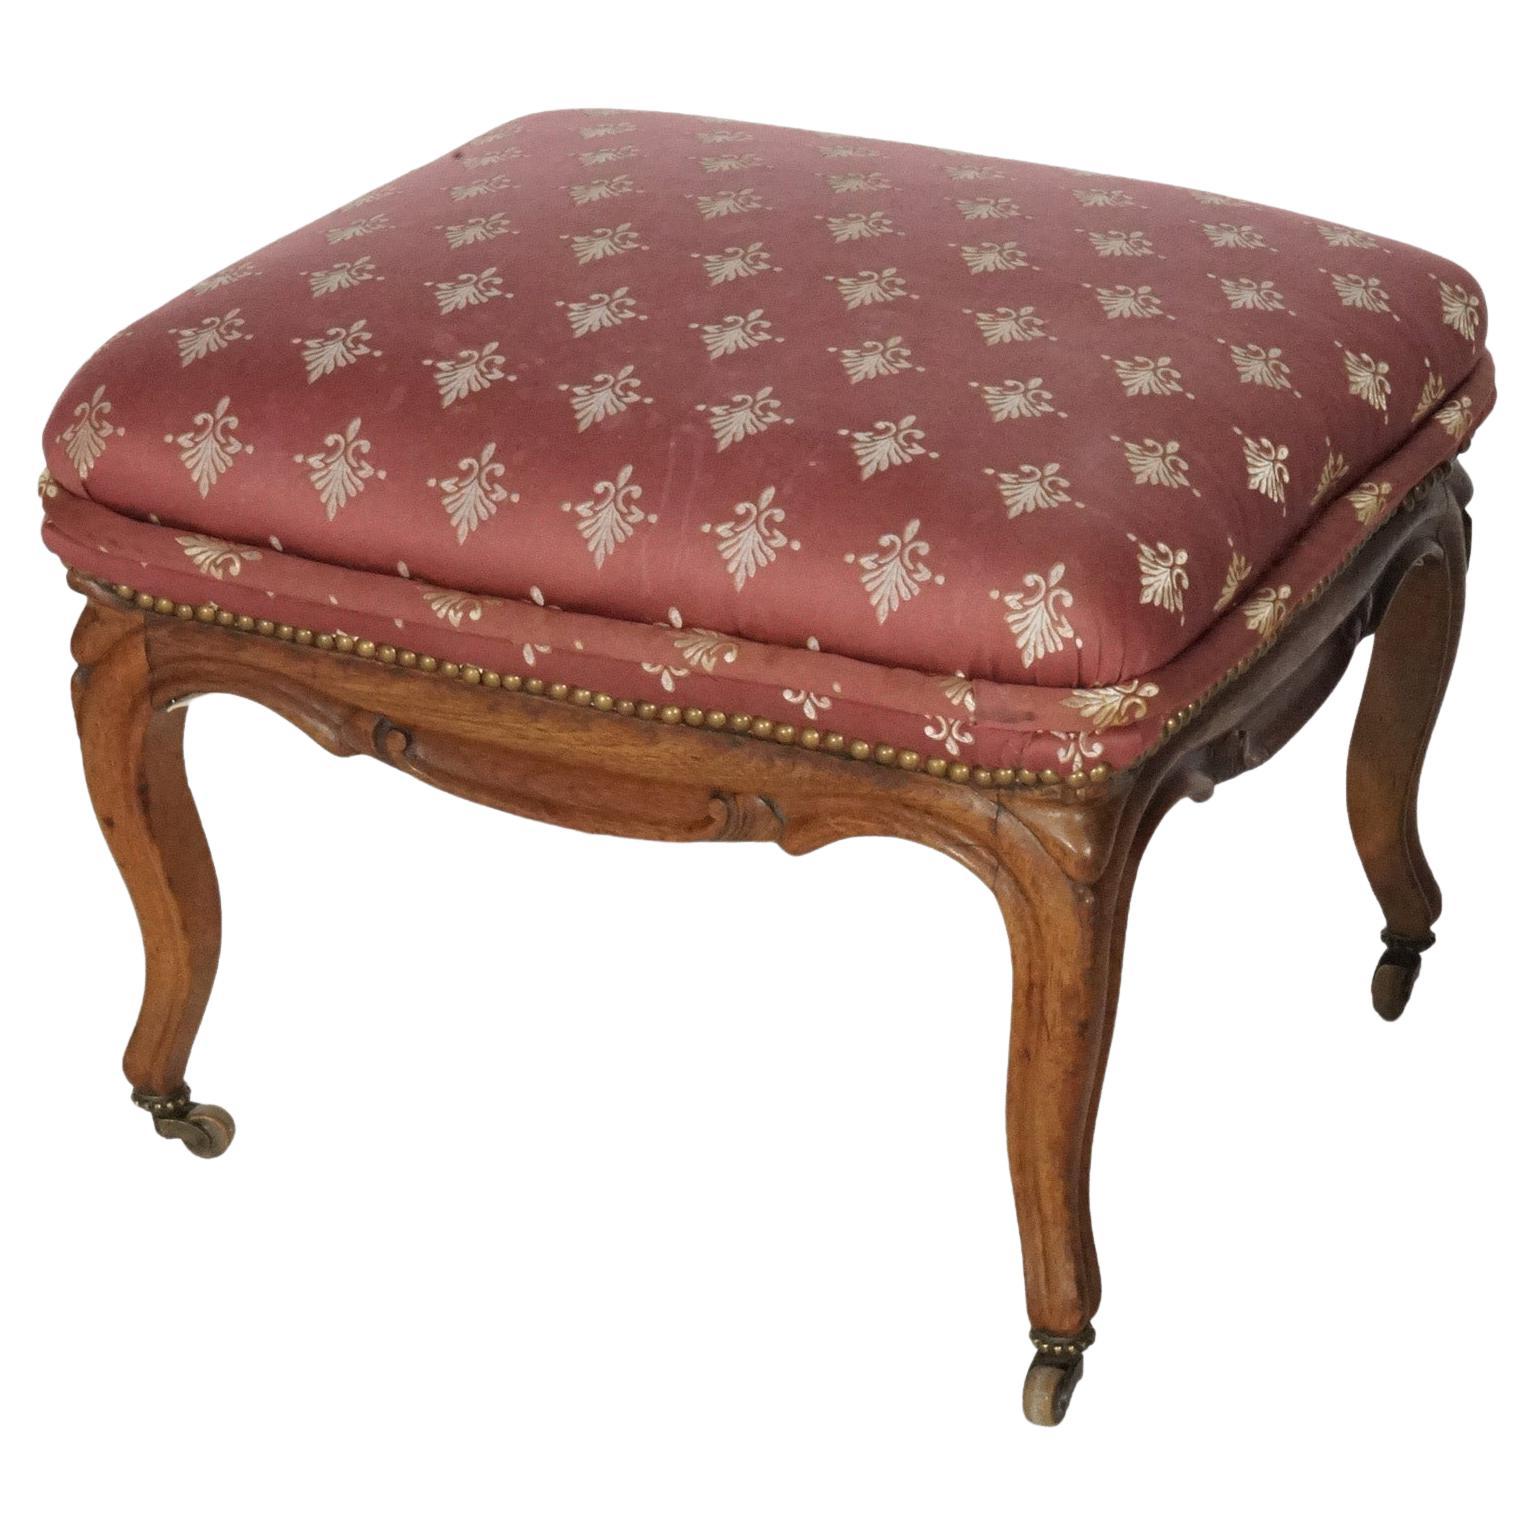 https://a.1stdibscdn.com/antique-french-style-carved-walnut-upholstered-foot-stool-circa-1920-for-sale/f_23963/f_331109621677905156194/f_33110962_1677905156662_bg_processed.jpg